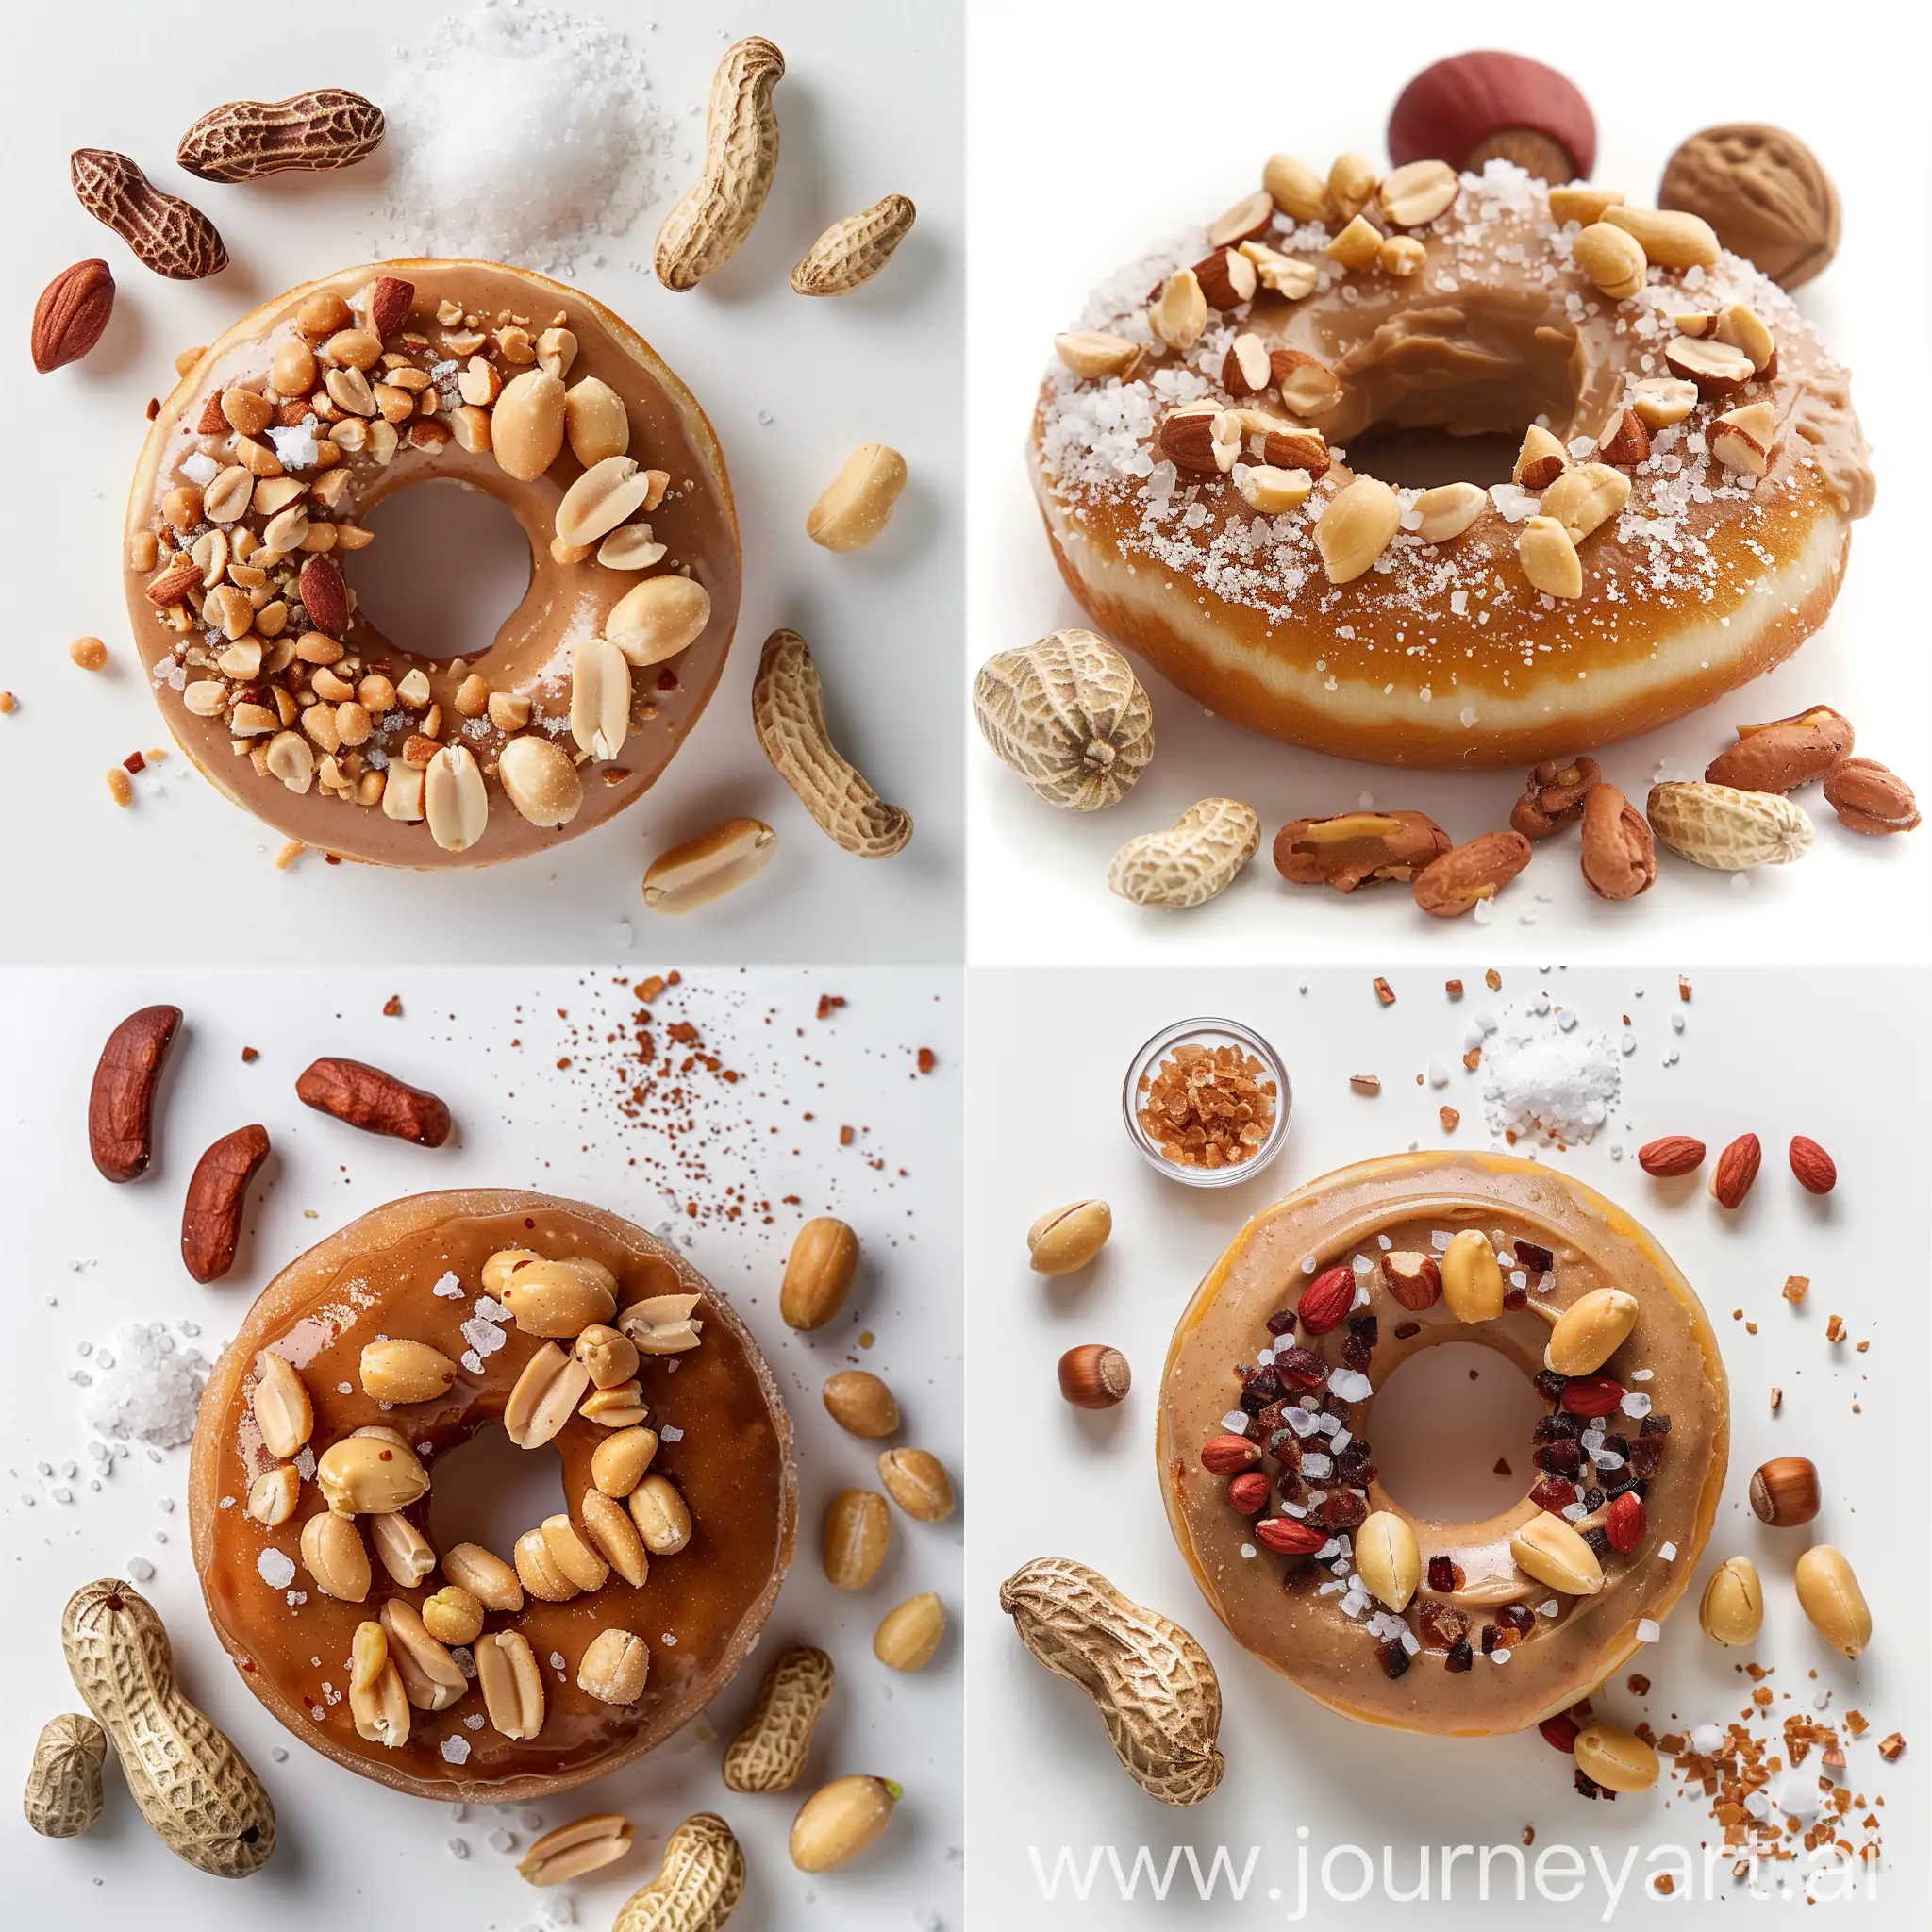 Peanut-Butter-Donut-with-Salted-Peanuts-on-White-Background